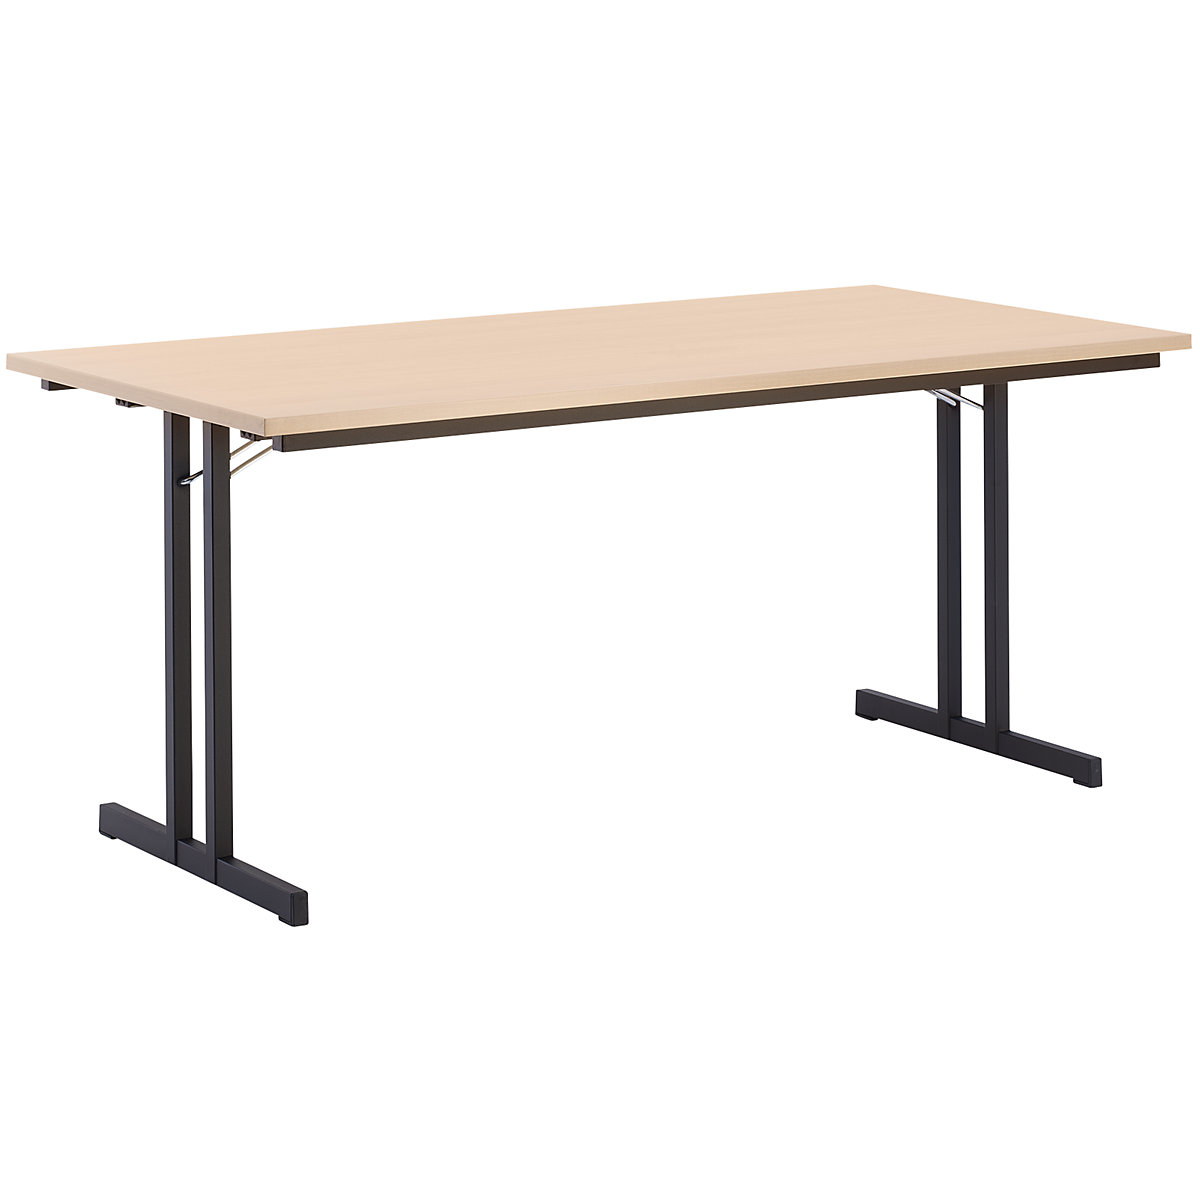 Folding table, with extra thick tabletop, height 720 mm, 1600 x 700 mm, black frame, beech finish tabletop-8